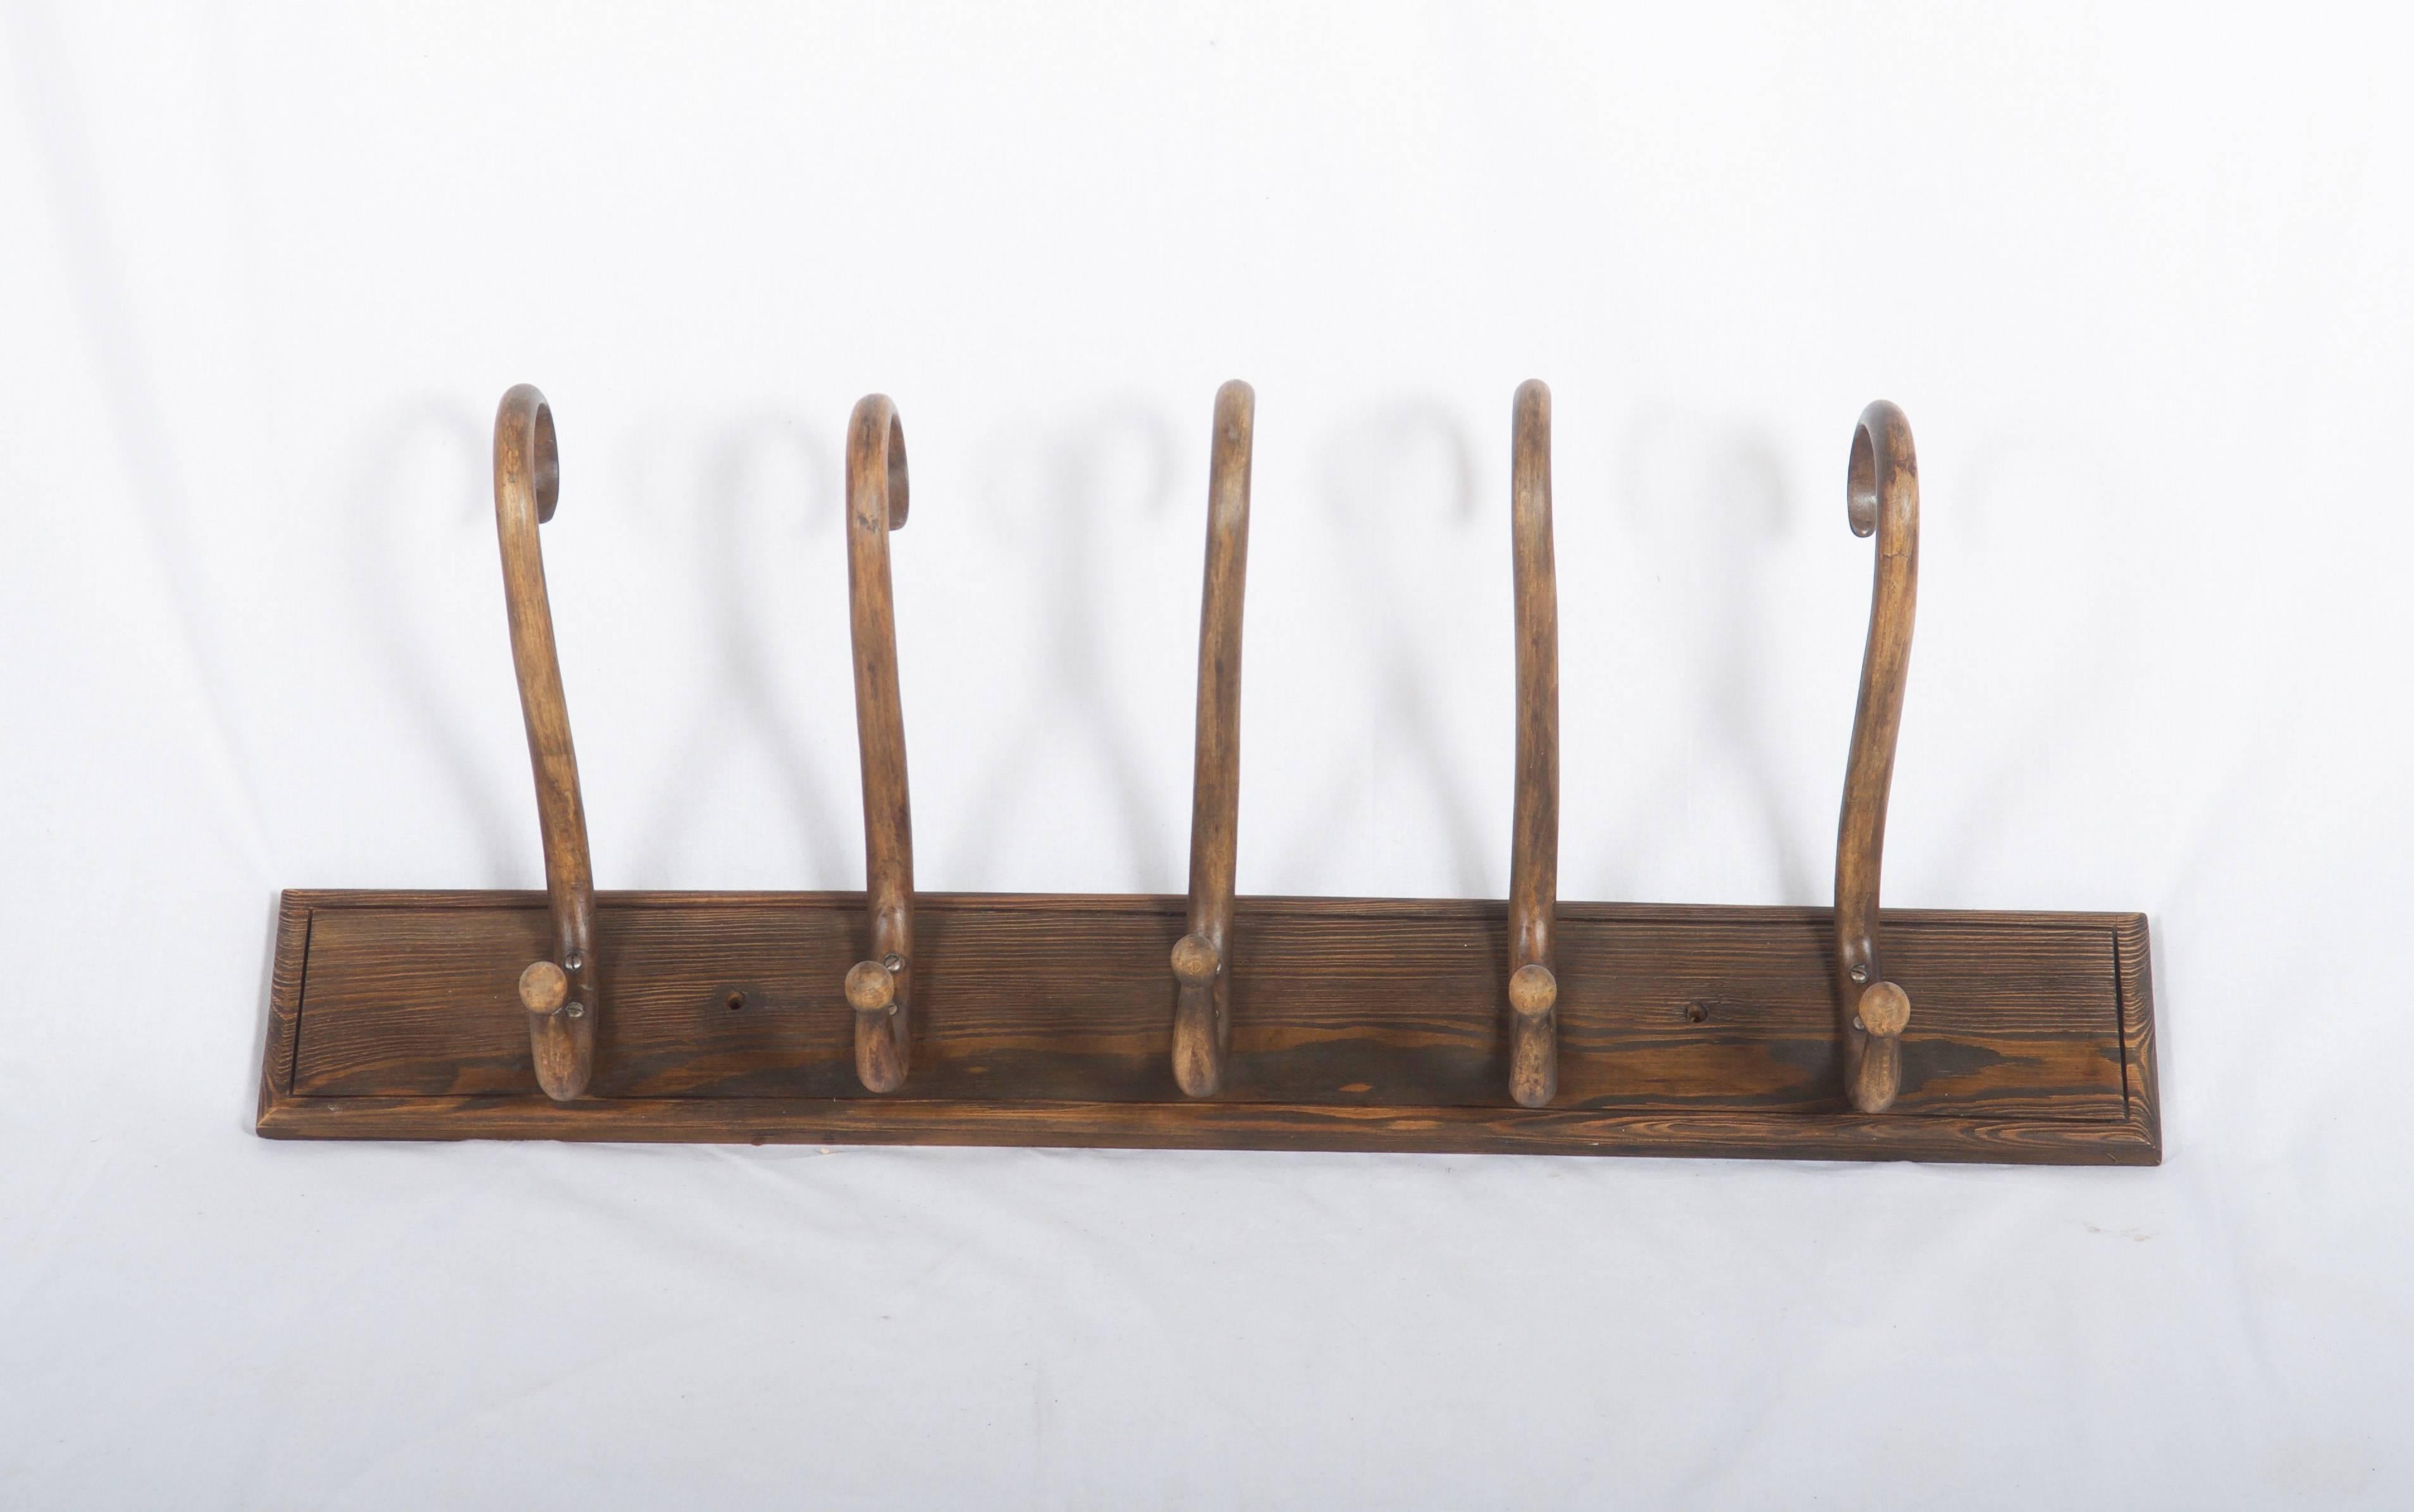 Austrian bentwood coat hanger with five S scroll coat or hat hangers mounted on a backplate. Made in the style of Thonet or Kohn.